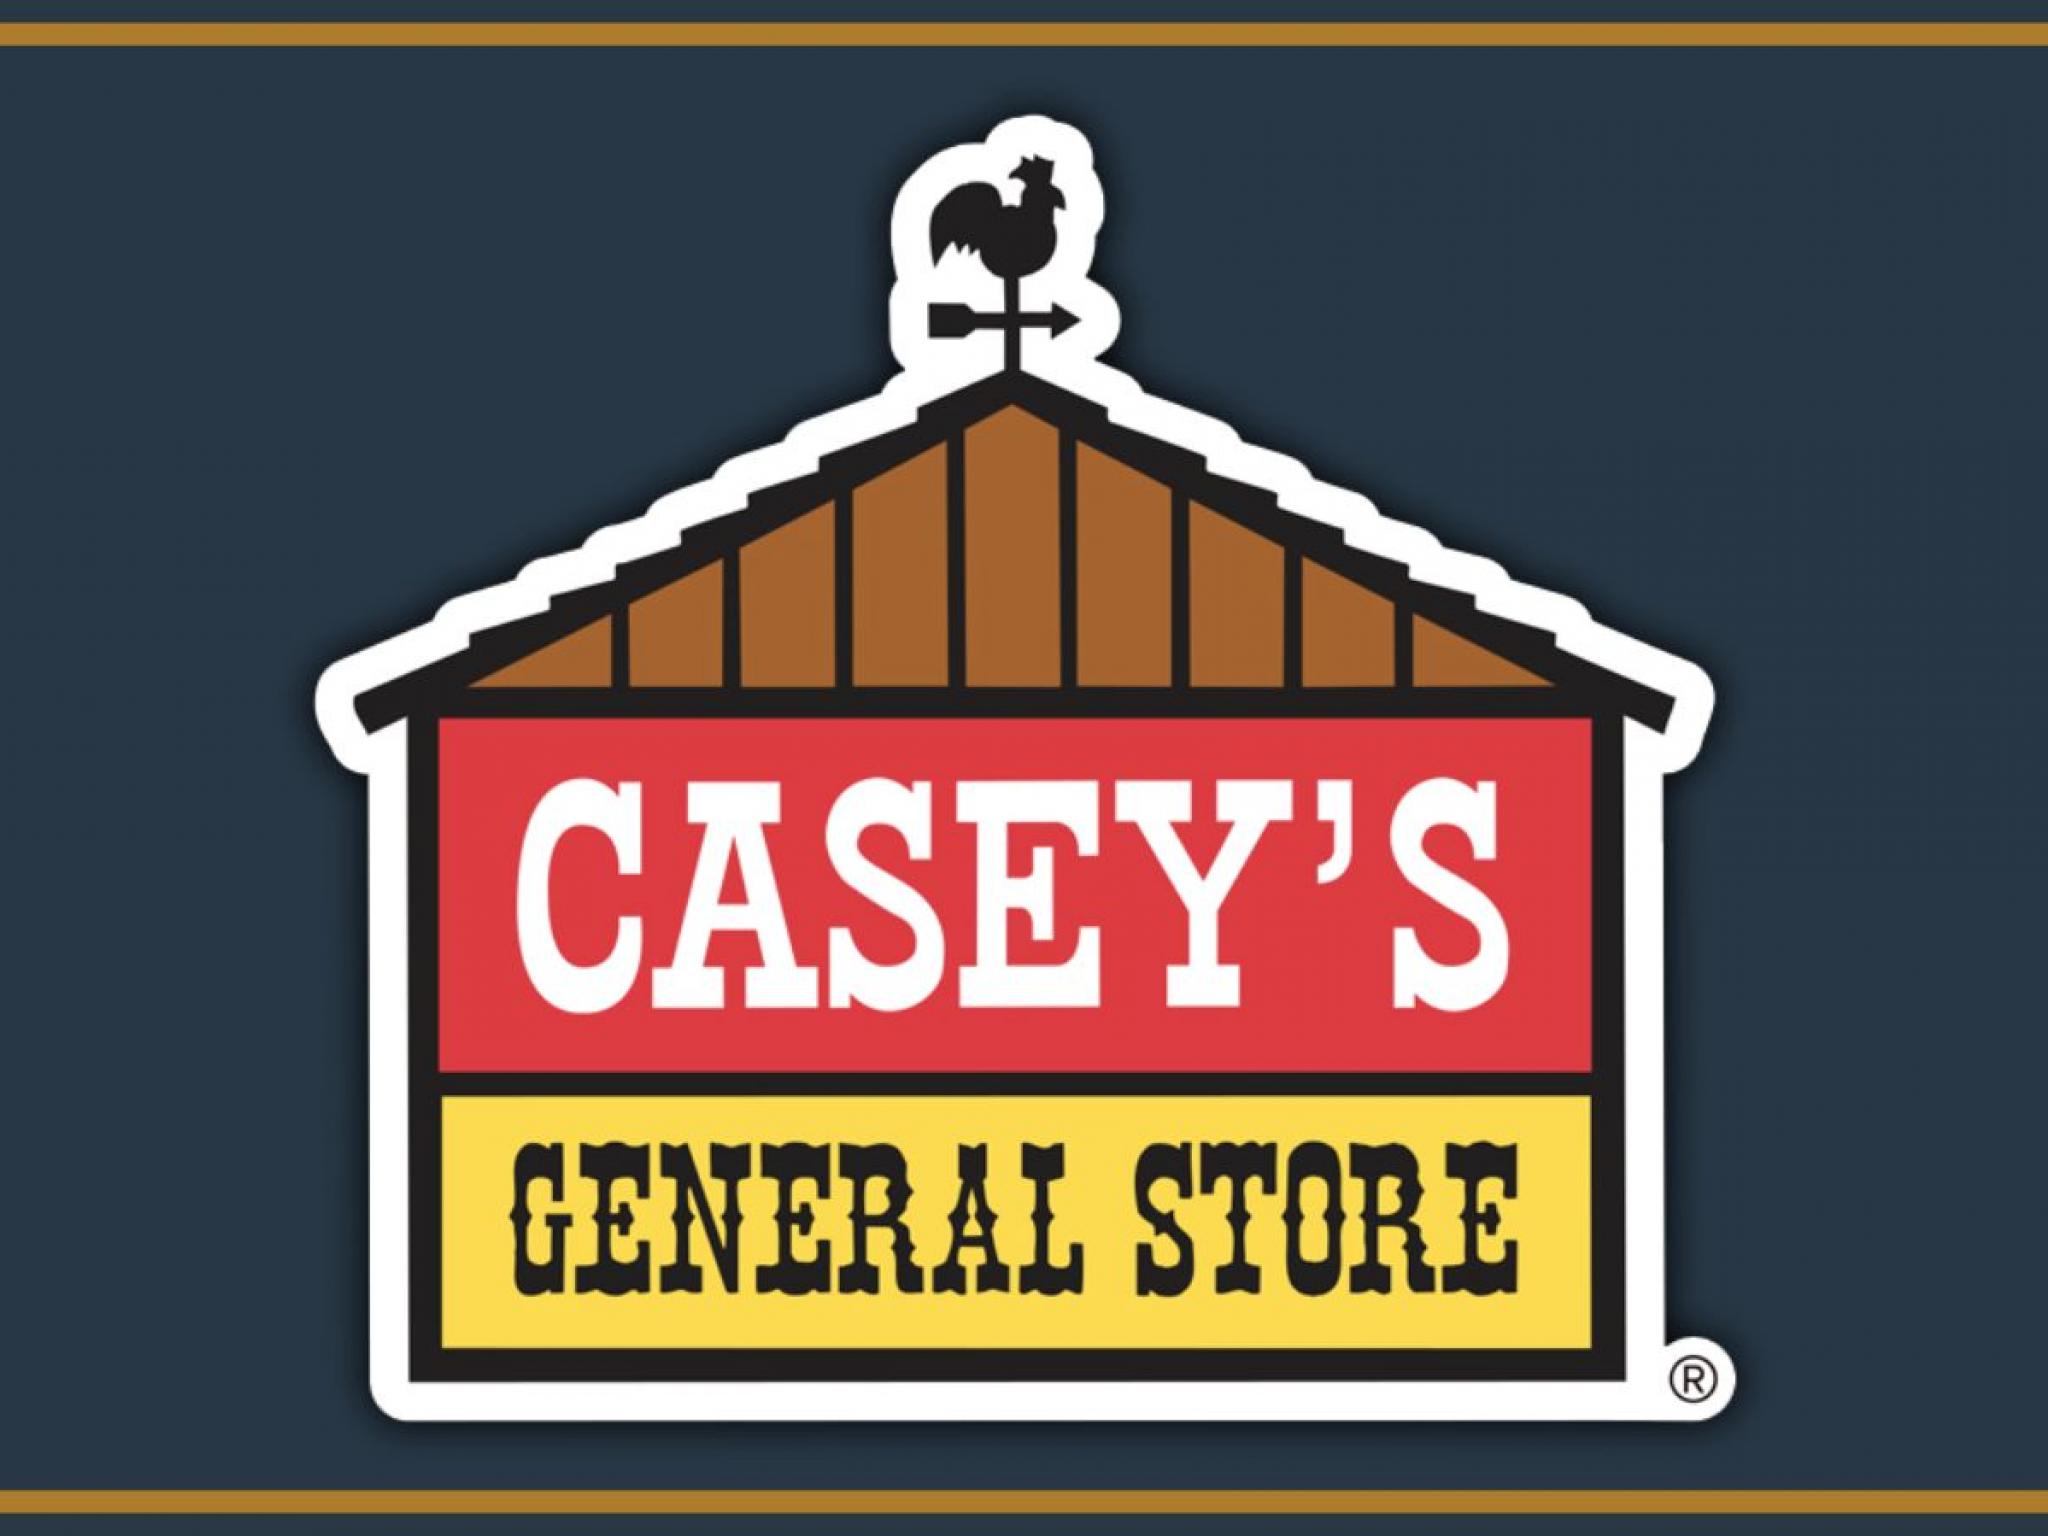  caseys-general-stores-cognyte-software-beauty-health-and-other-big-stocks-moving-higher-on-tuesday 